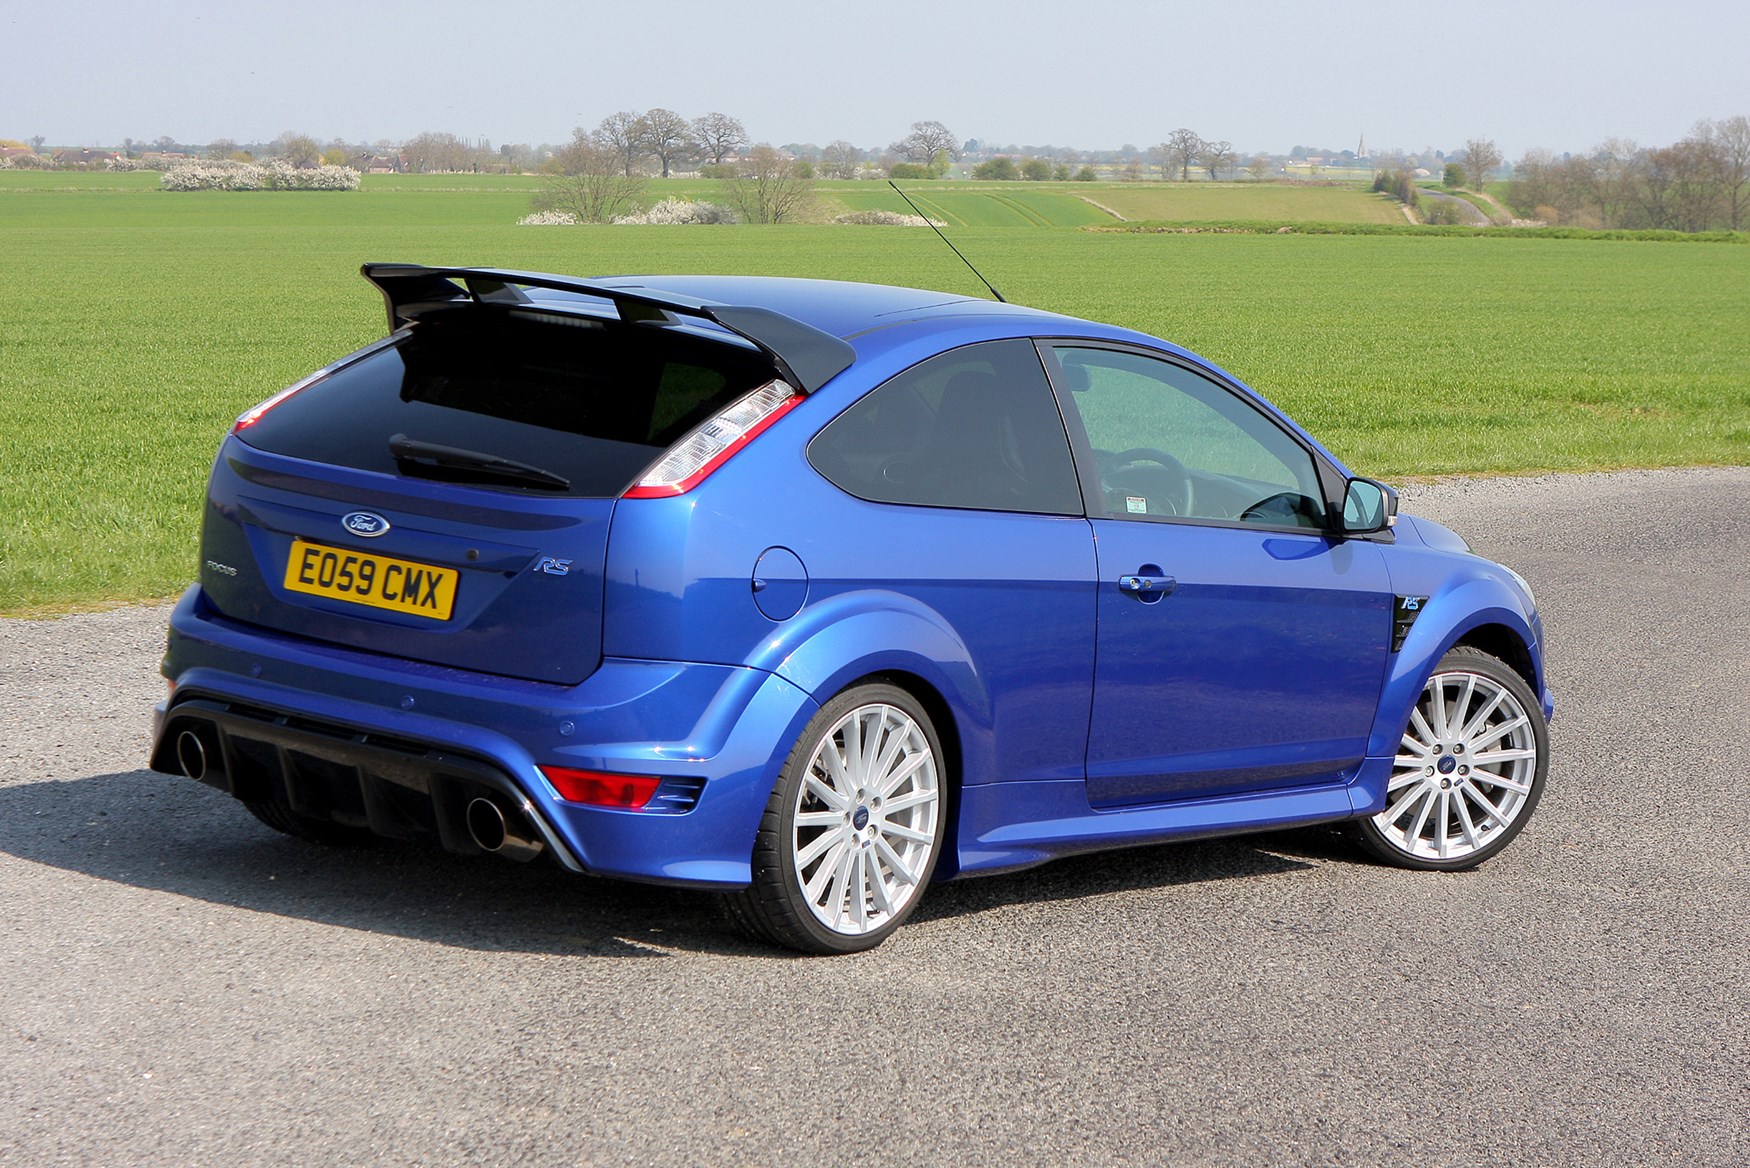 Ford Focus RS (2009 - 2010) interior, tech and comfort.